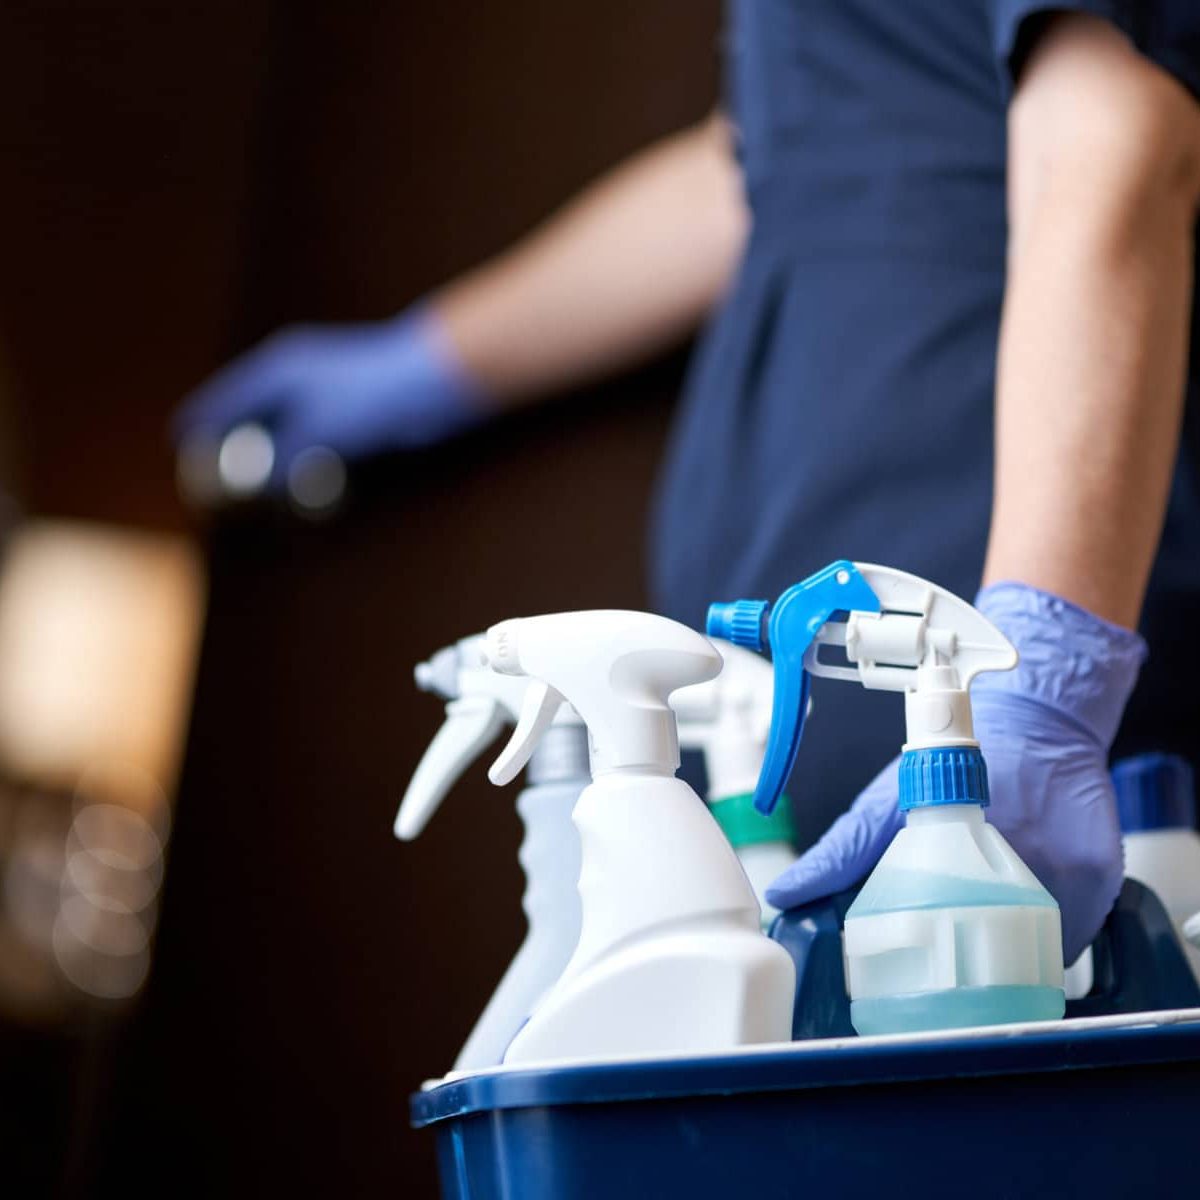 Cropped photo of chambermaid keeping all necessary cleaning and disinfection accessories in hotel room. Hotel service concept